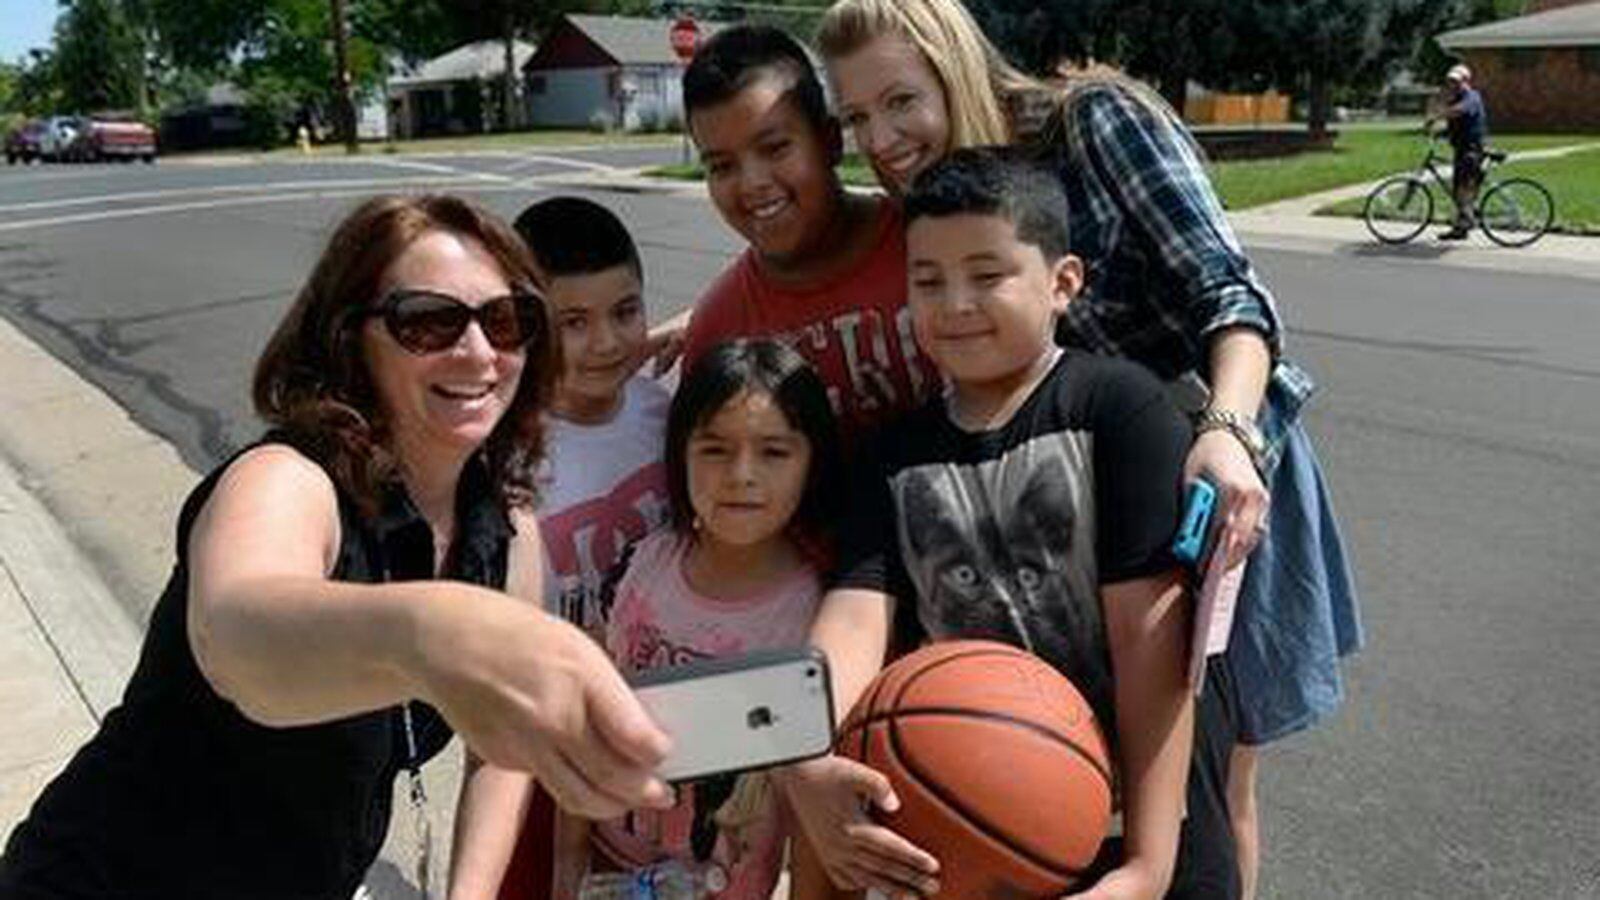 Kindergarten teacher Lori Manhart, left, and school psychologist Jennifer Keller Johnson take a selfie with students in 2014. Home visits are a good way for educators to build relationships with kids, the report found.